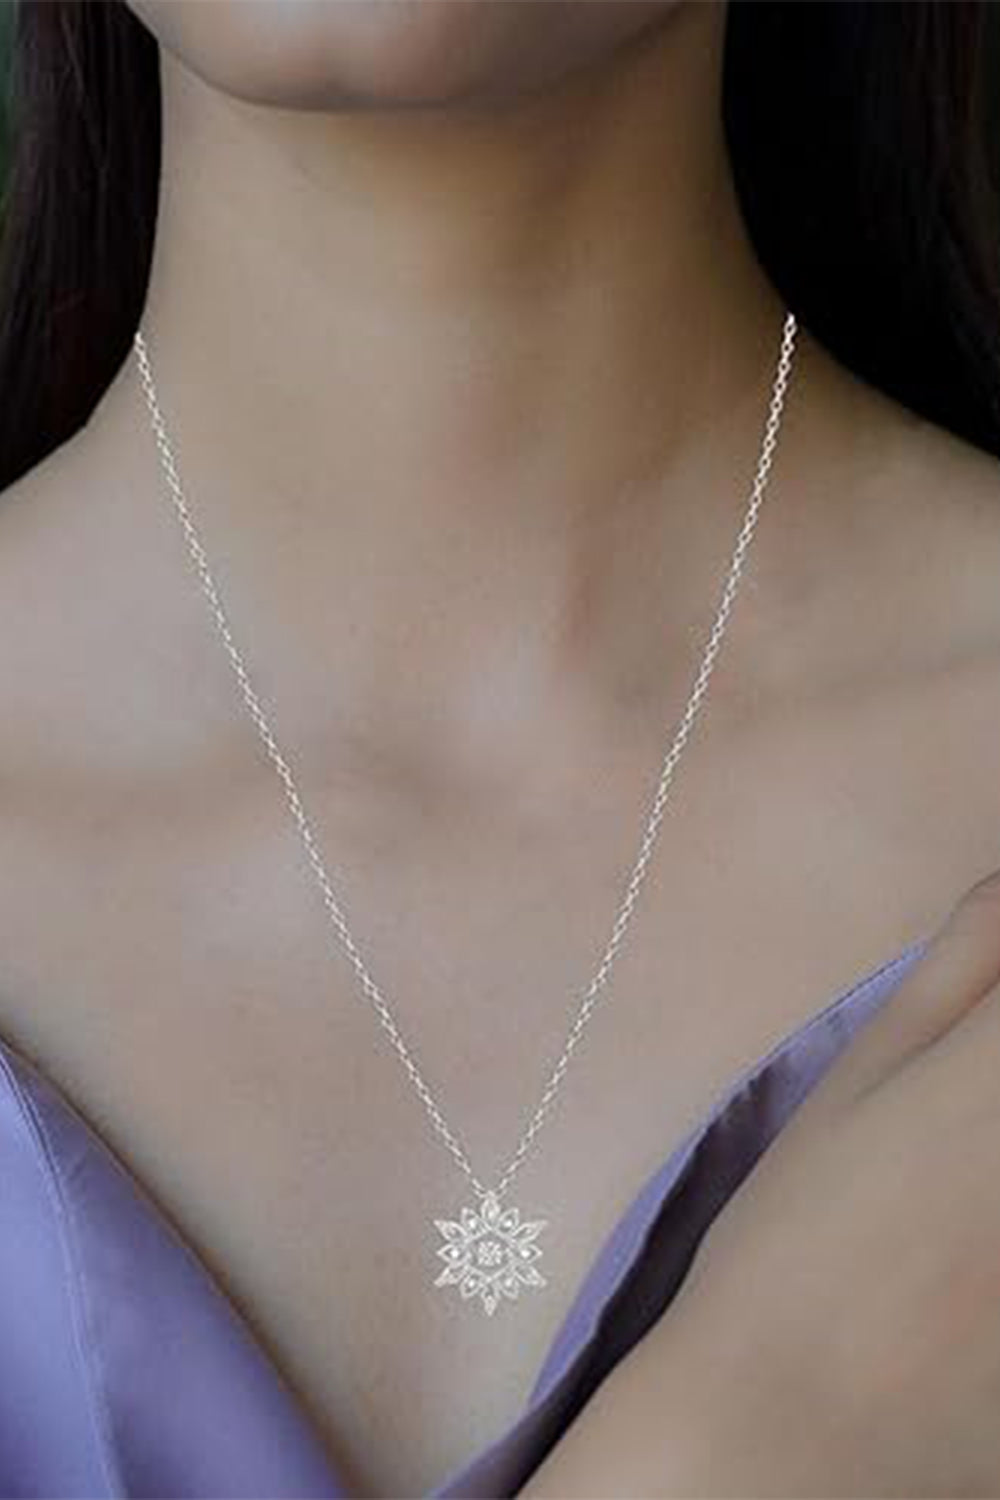 White Gold Color Vintage-Style Snowflake Pendant Necklace for Women 